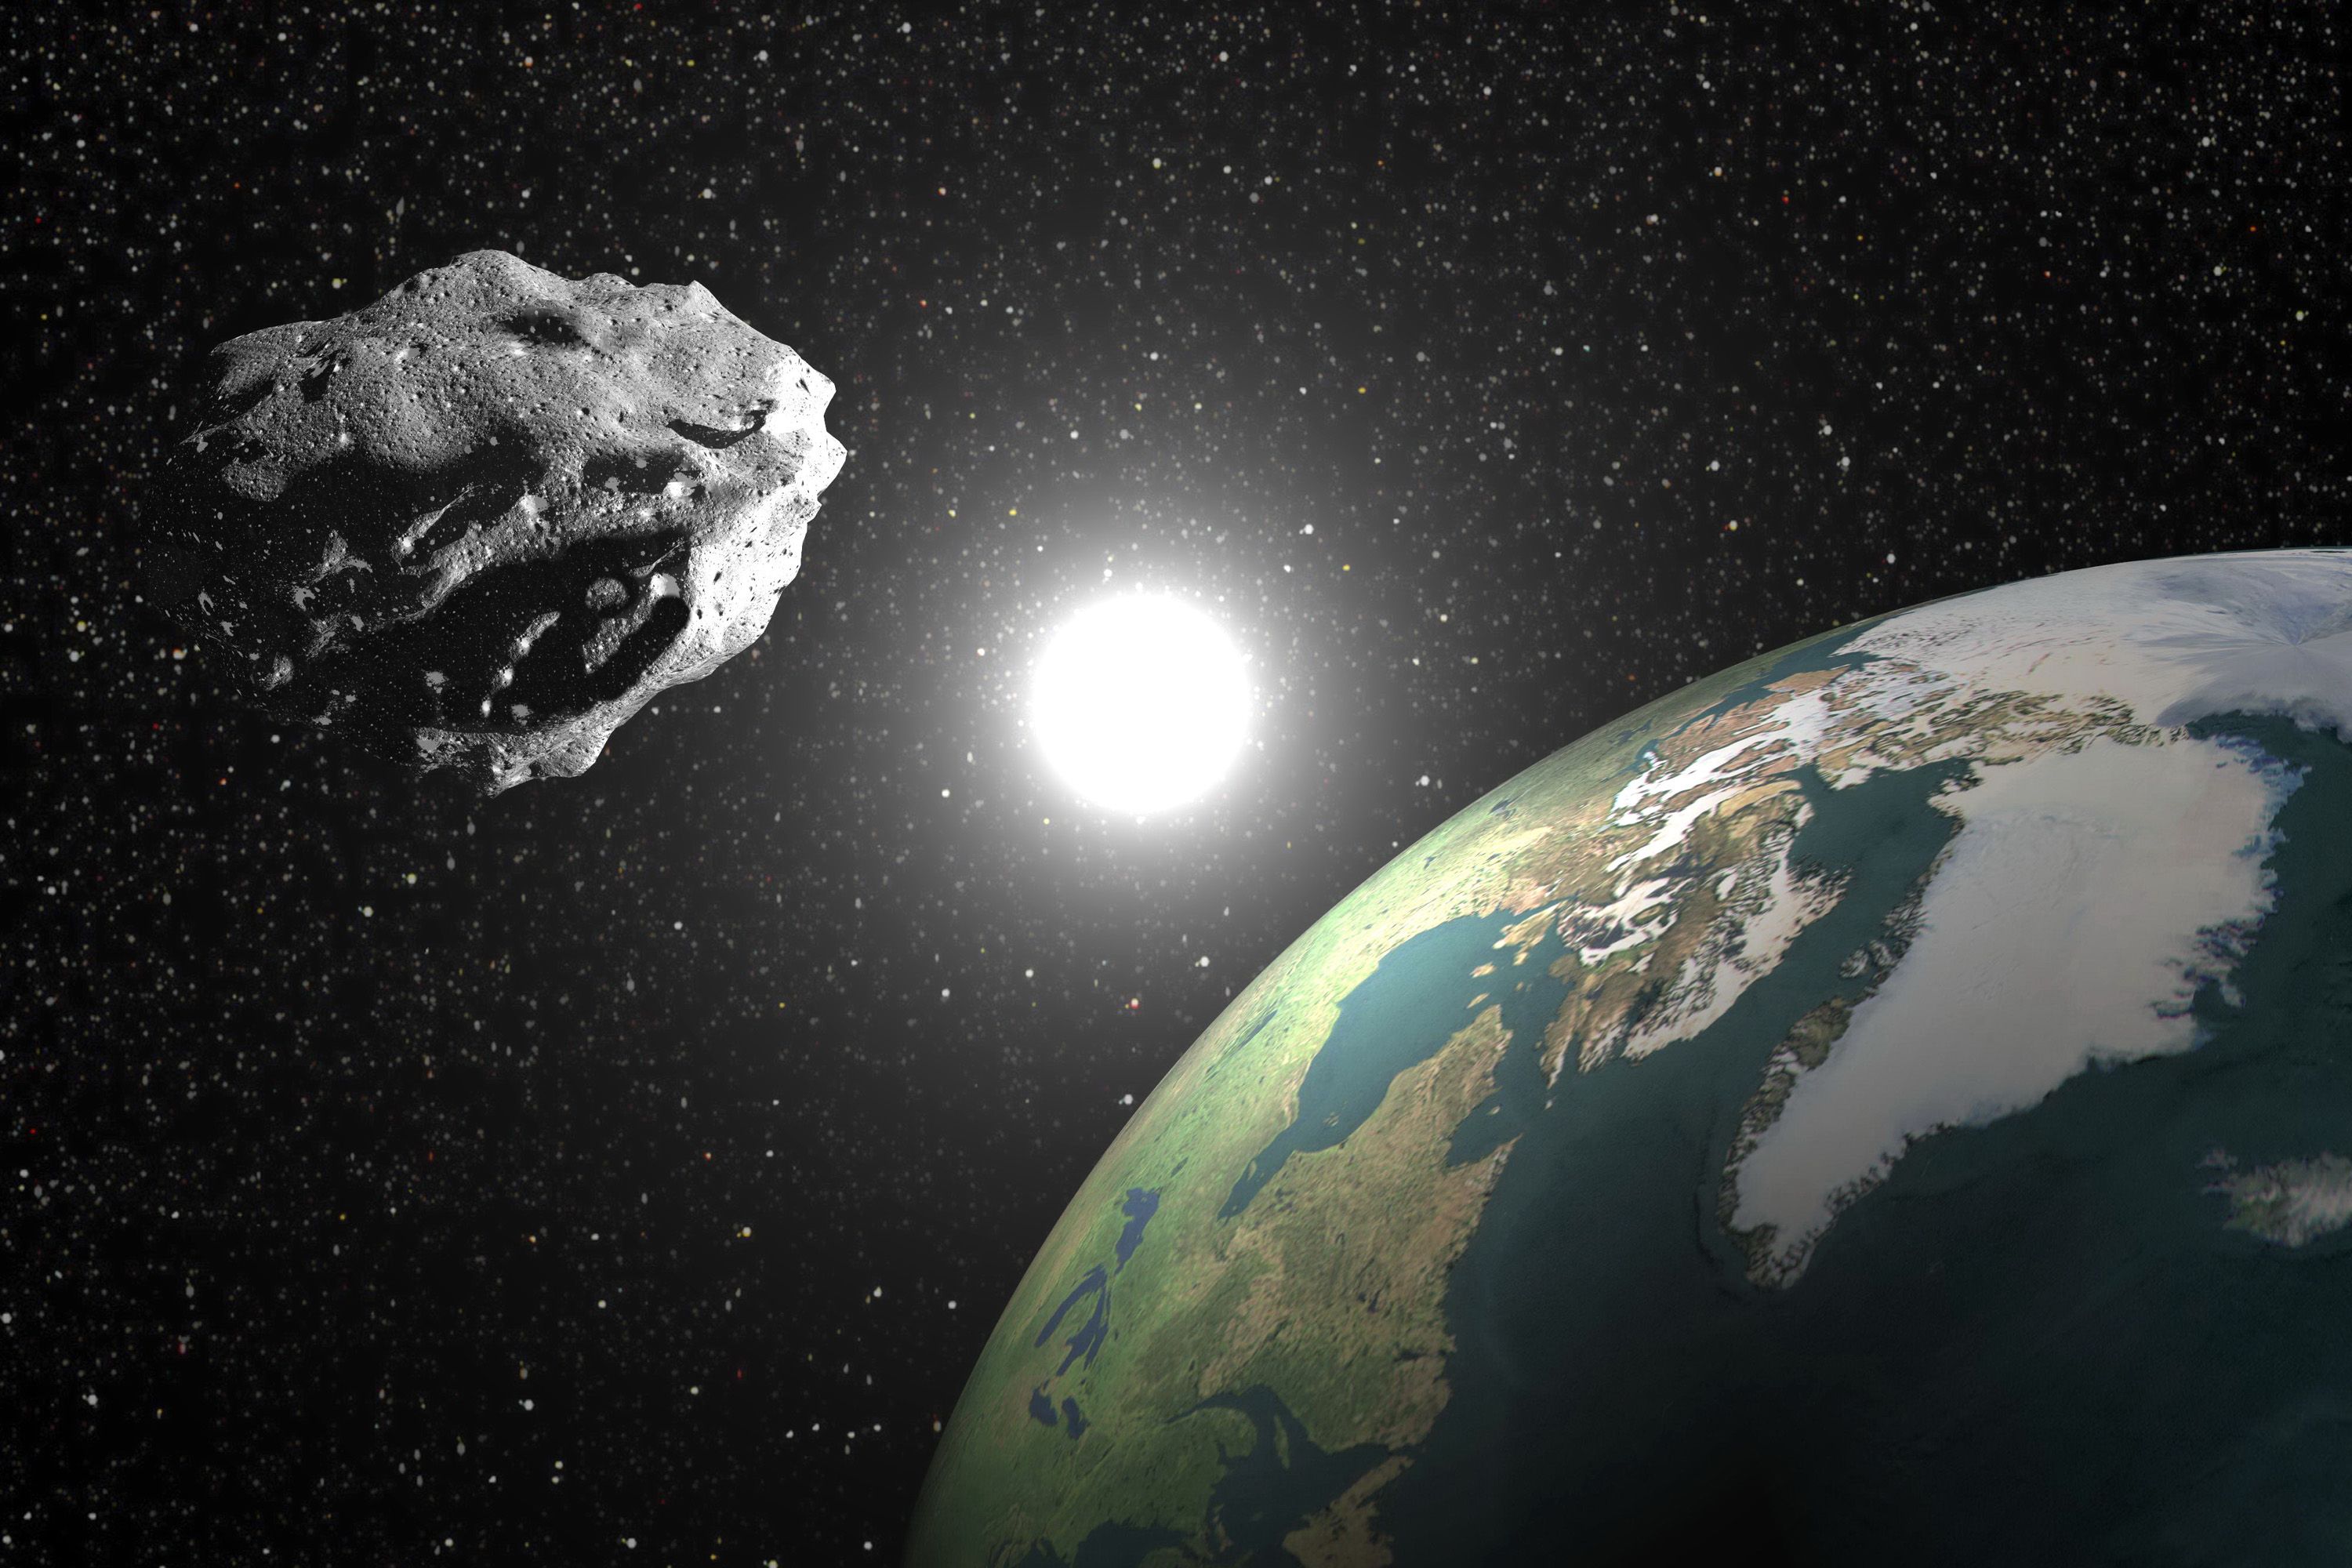 asteroid flew closer to earth